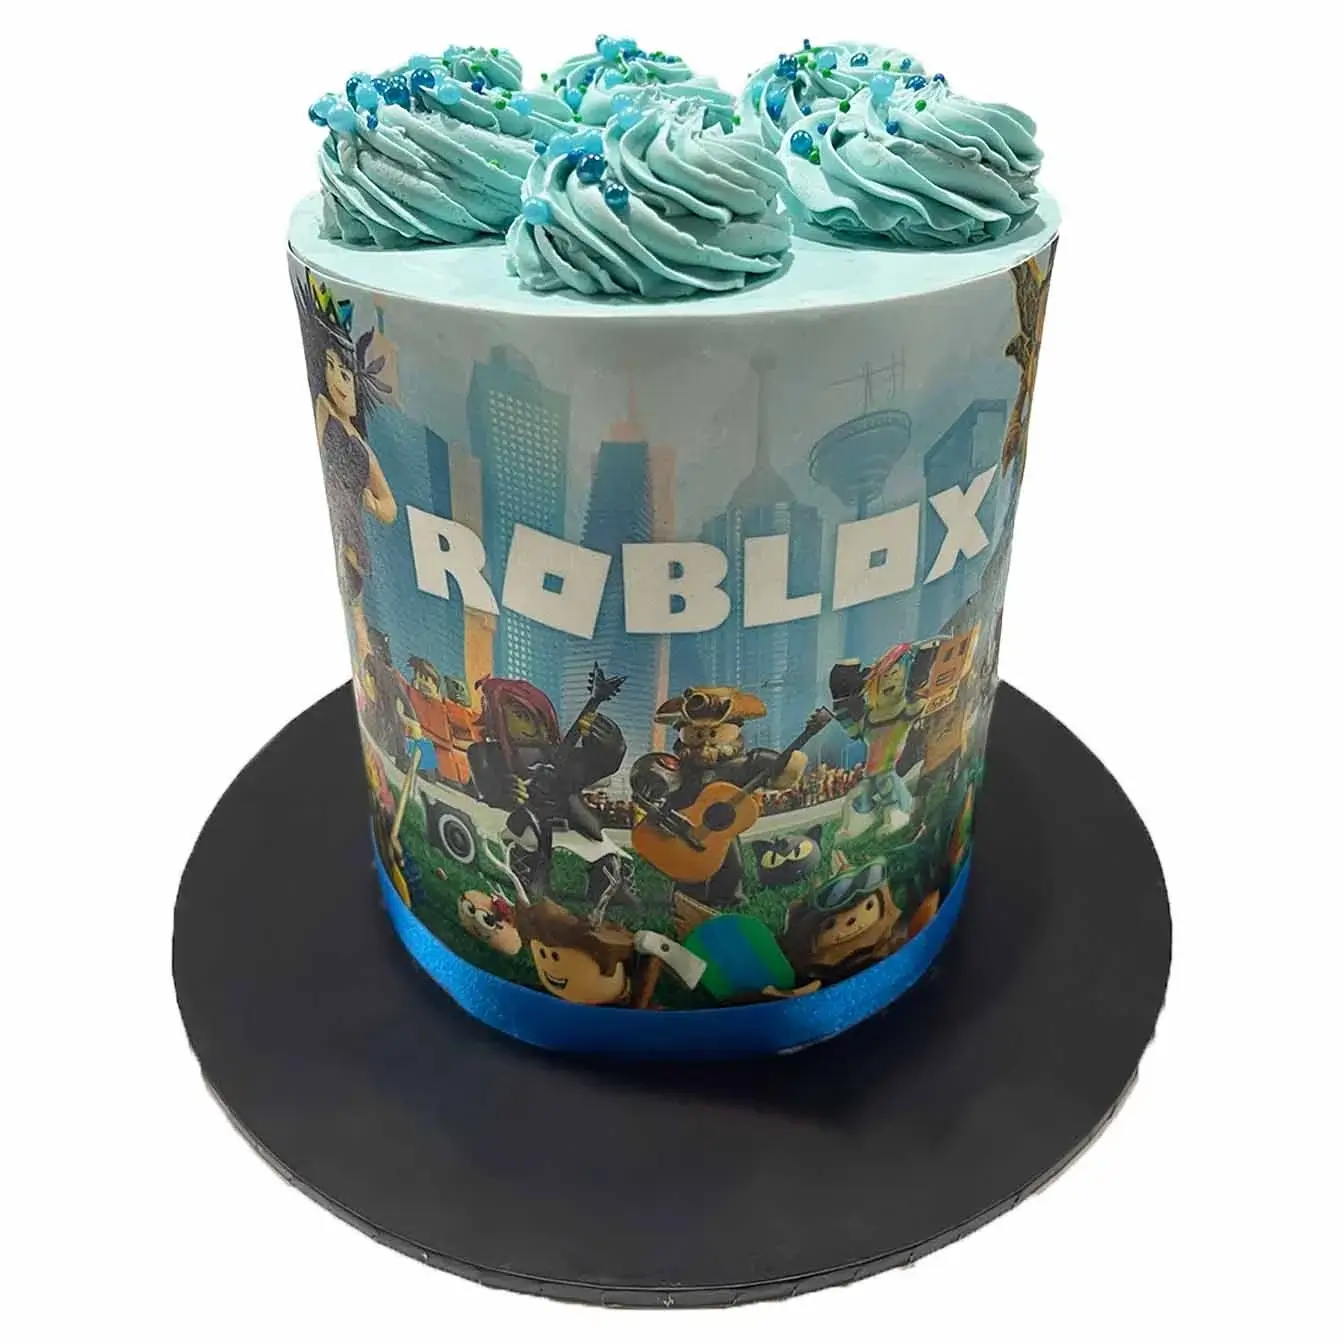 Blue Roblox Party Cake with Edible Characters and Matching Swirls